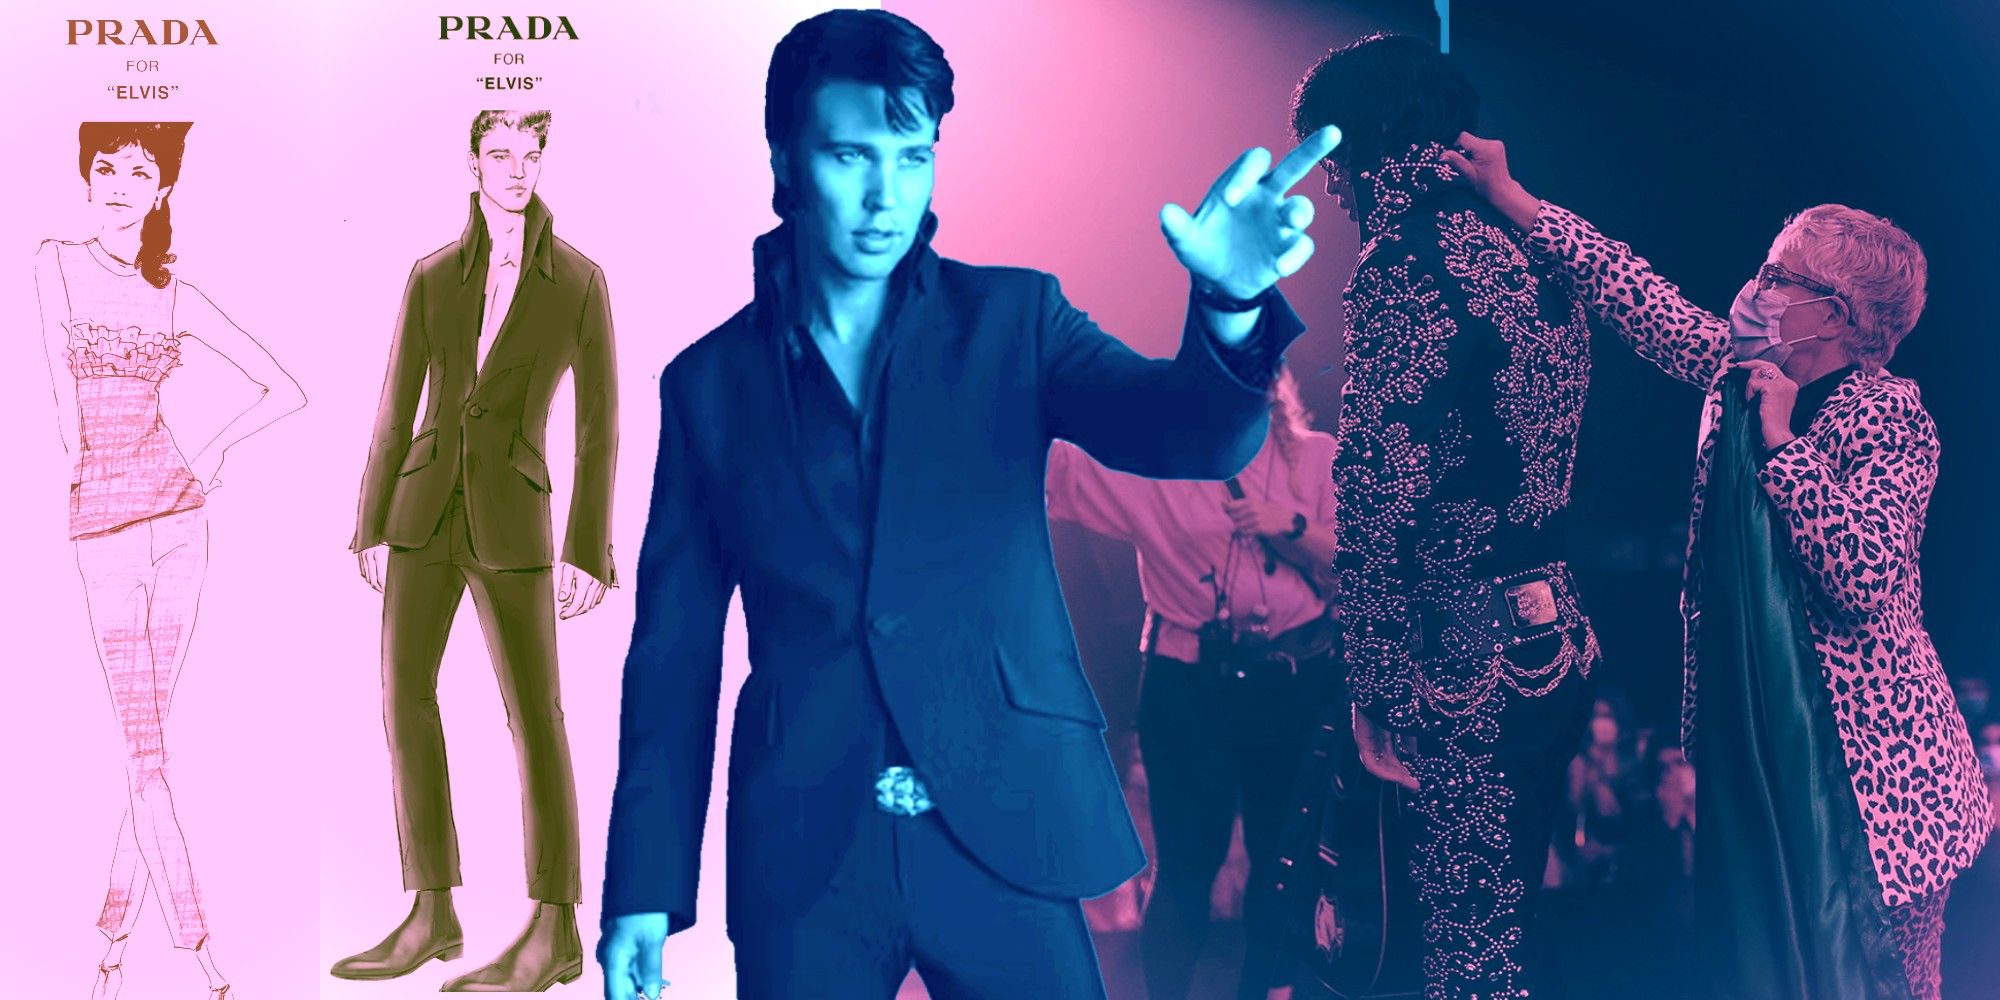 https://static1.srcdn.com/wordpress/wp-content/uploads/2022/07/Collage-of-Austin-Butler-as-Elvis-Presley-with-costume-sketches-behind-the-scenes-of-Elvis.jpg